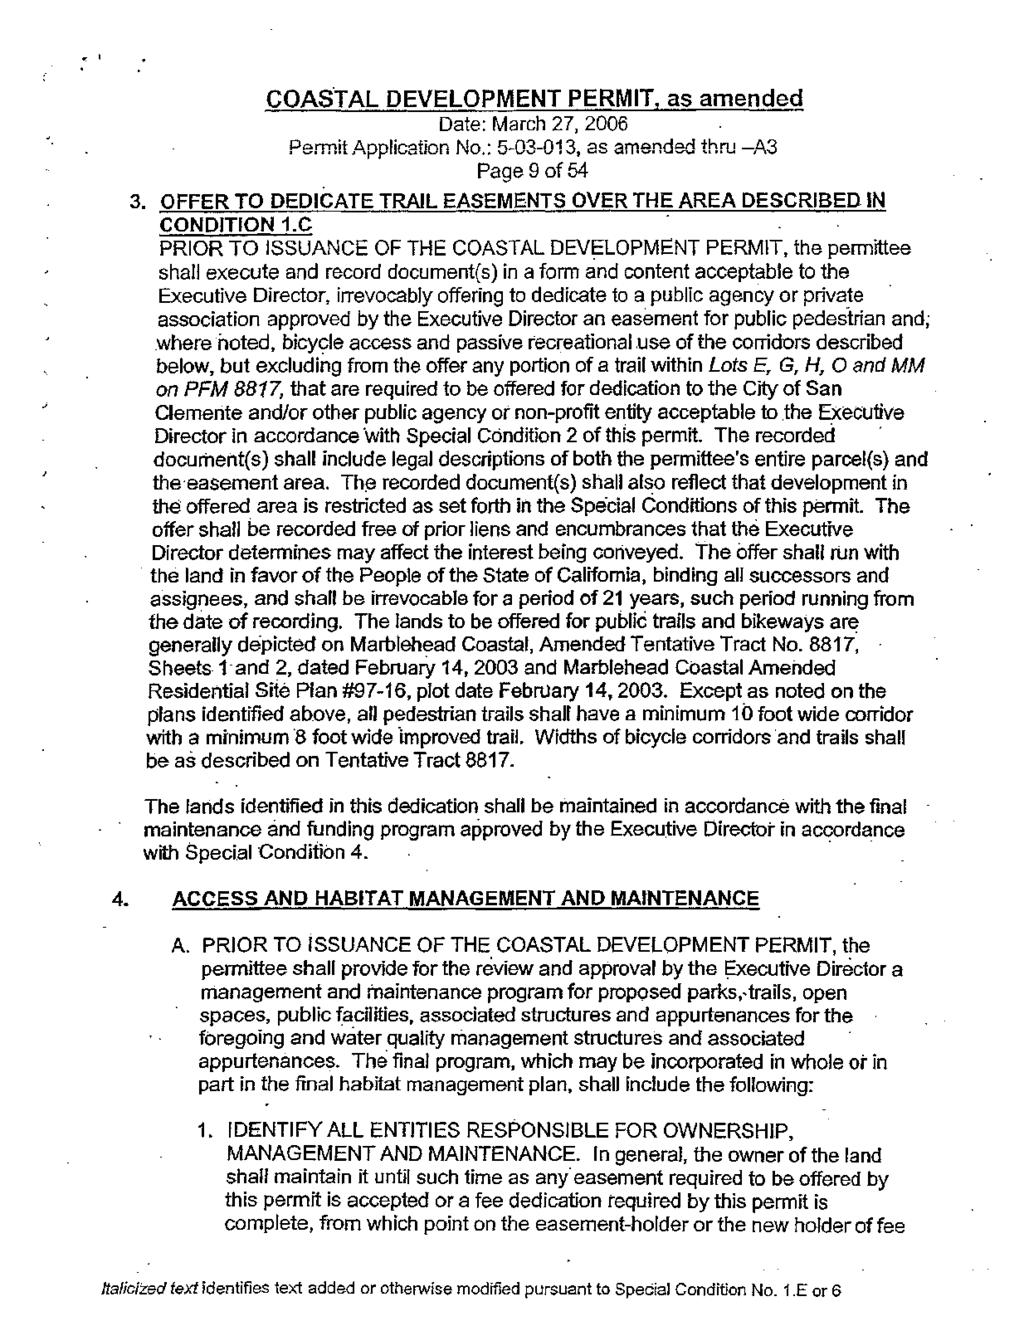 I COAstAL DEVELOPMENT PERMIT, as amended Date: March 27, 2006 Permit Application No.: 5-03-013, as amended thru -P',3 Page 9 of 54 3.